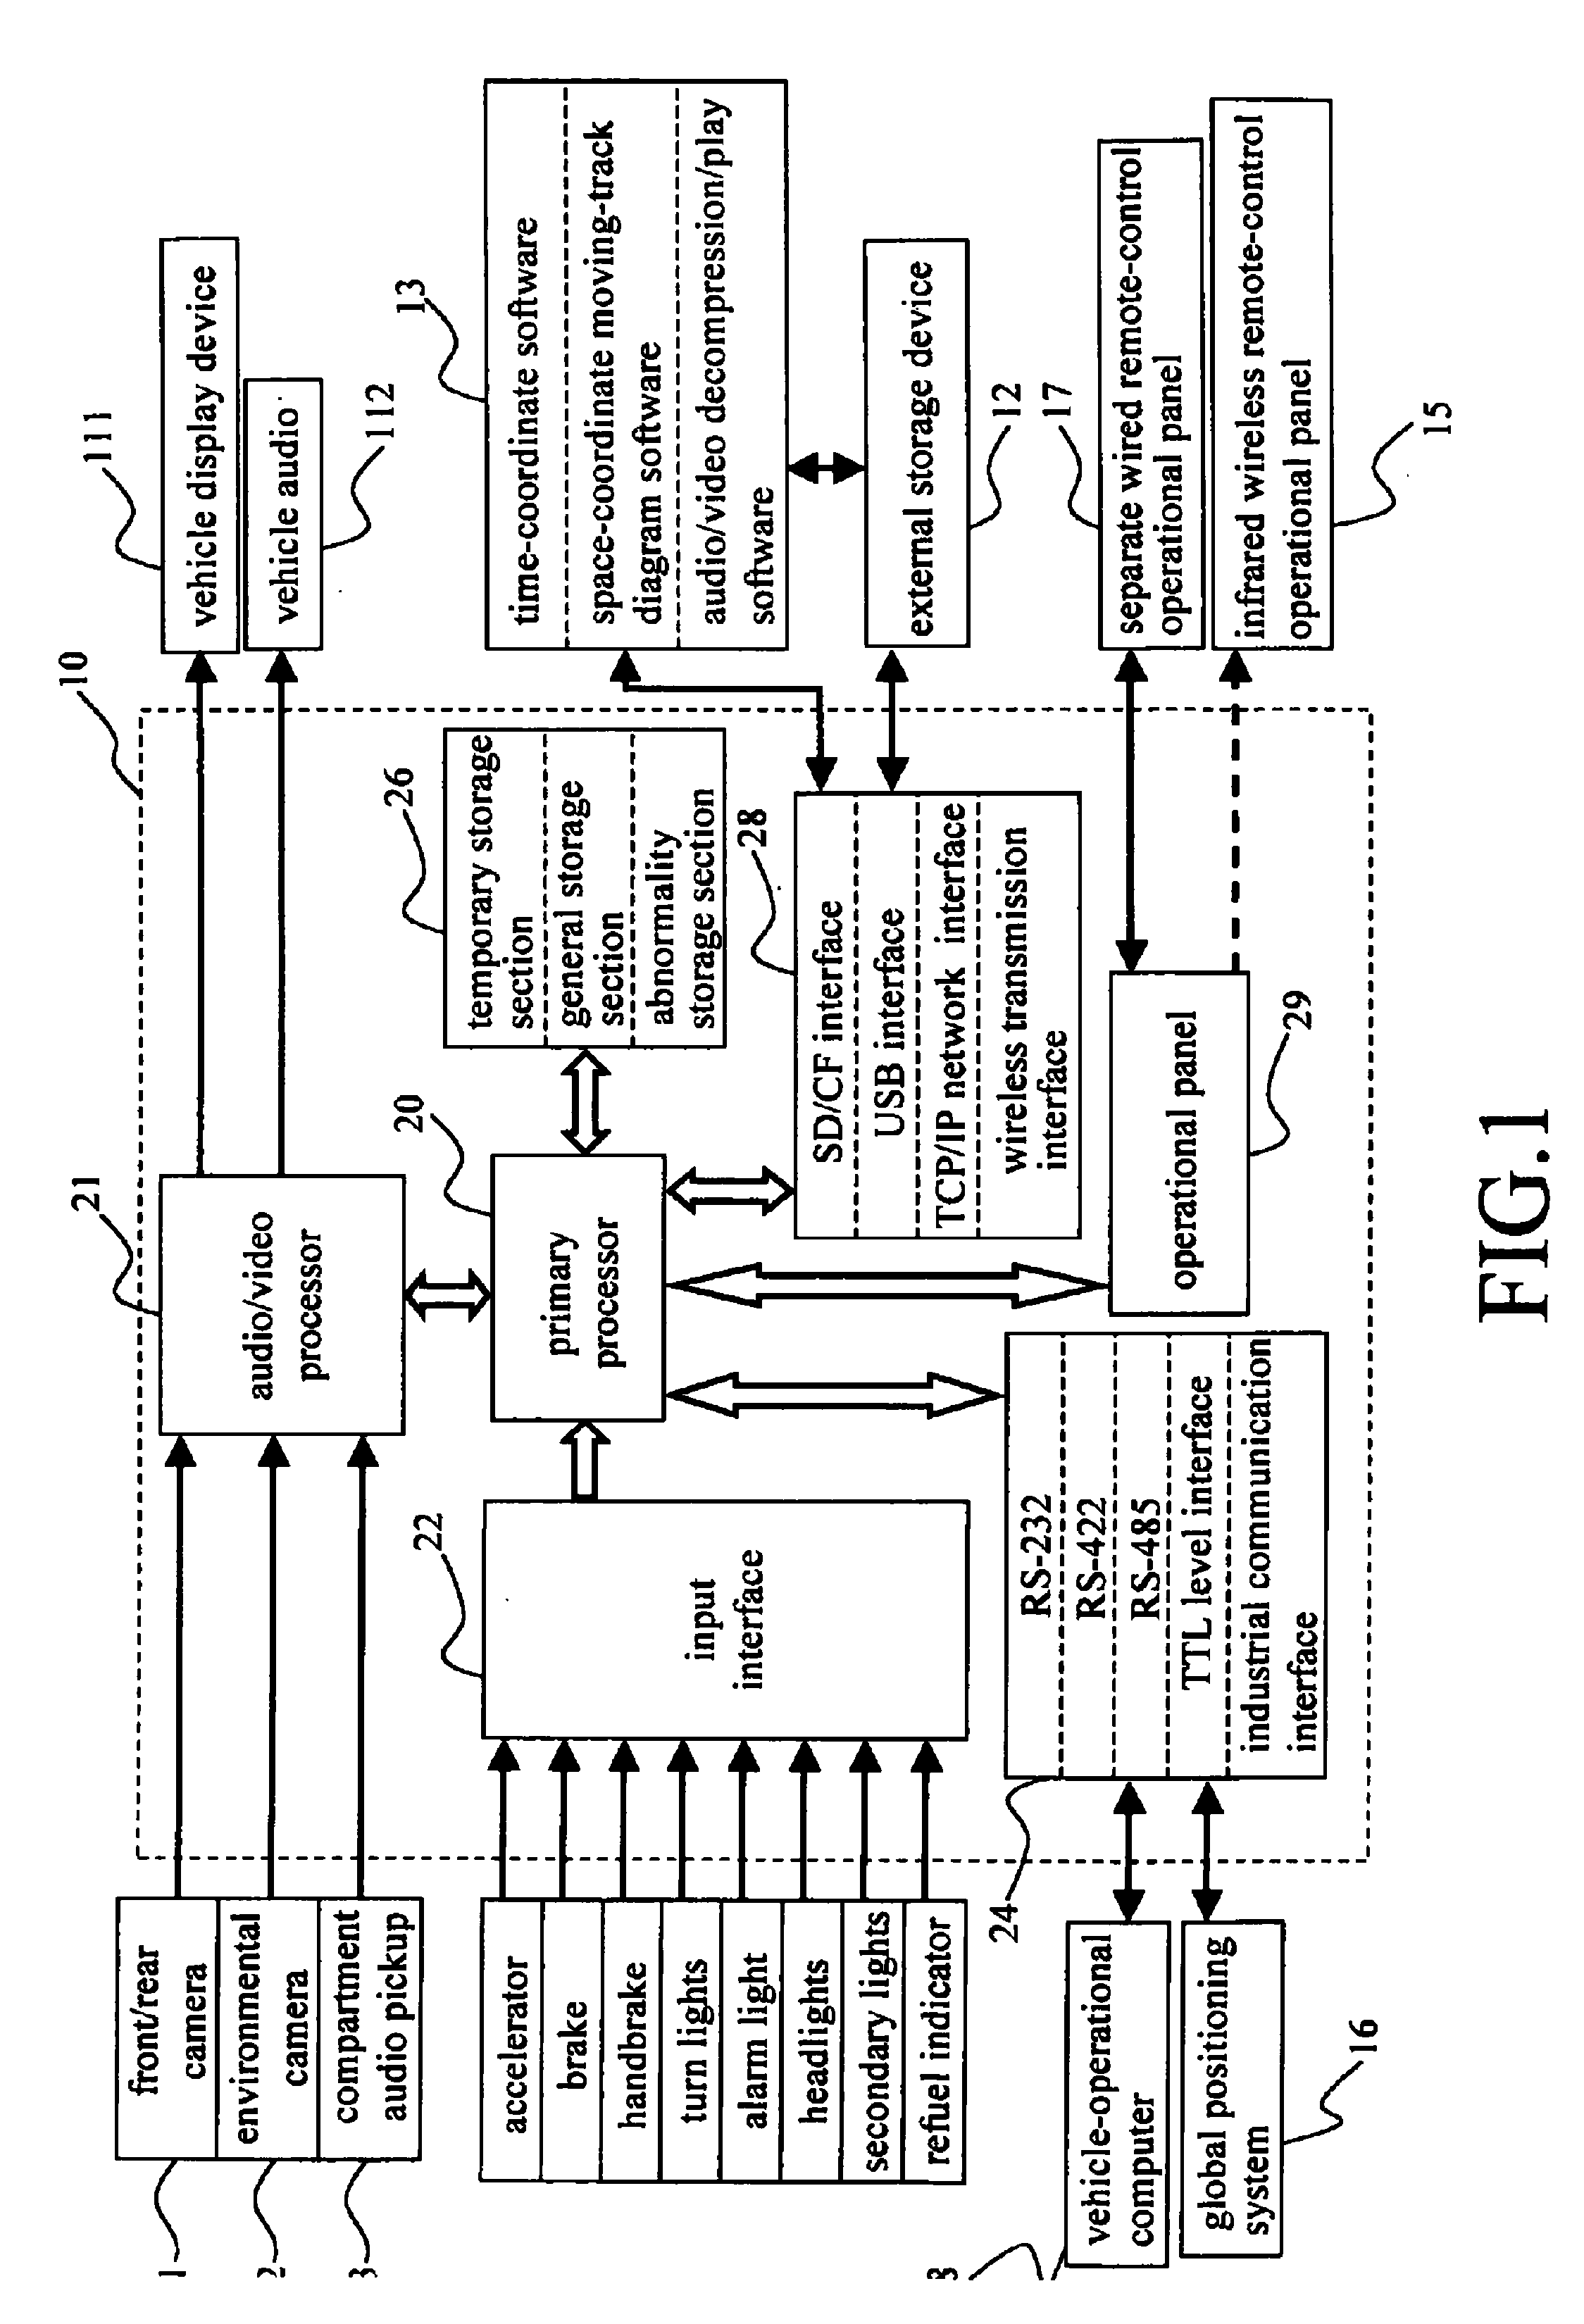 Vehicle running-data recording device capable of recording moving tracks and environmental audio/video data